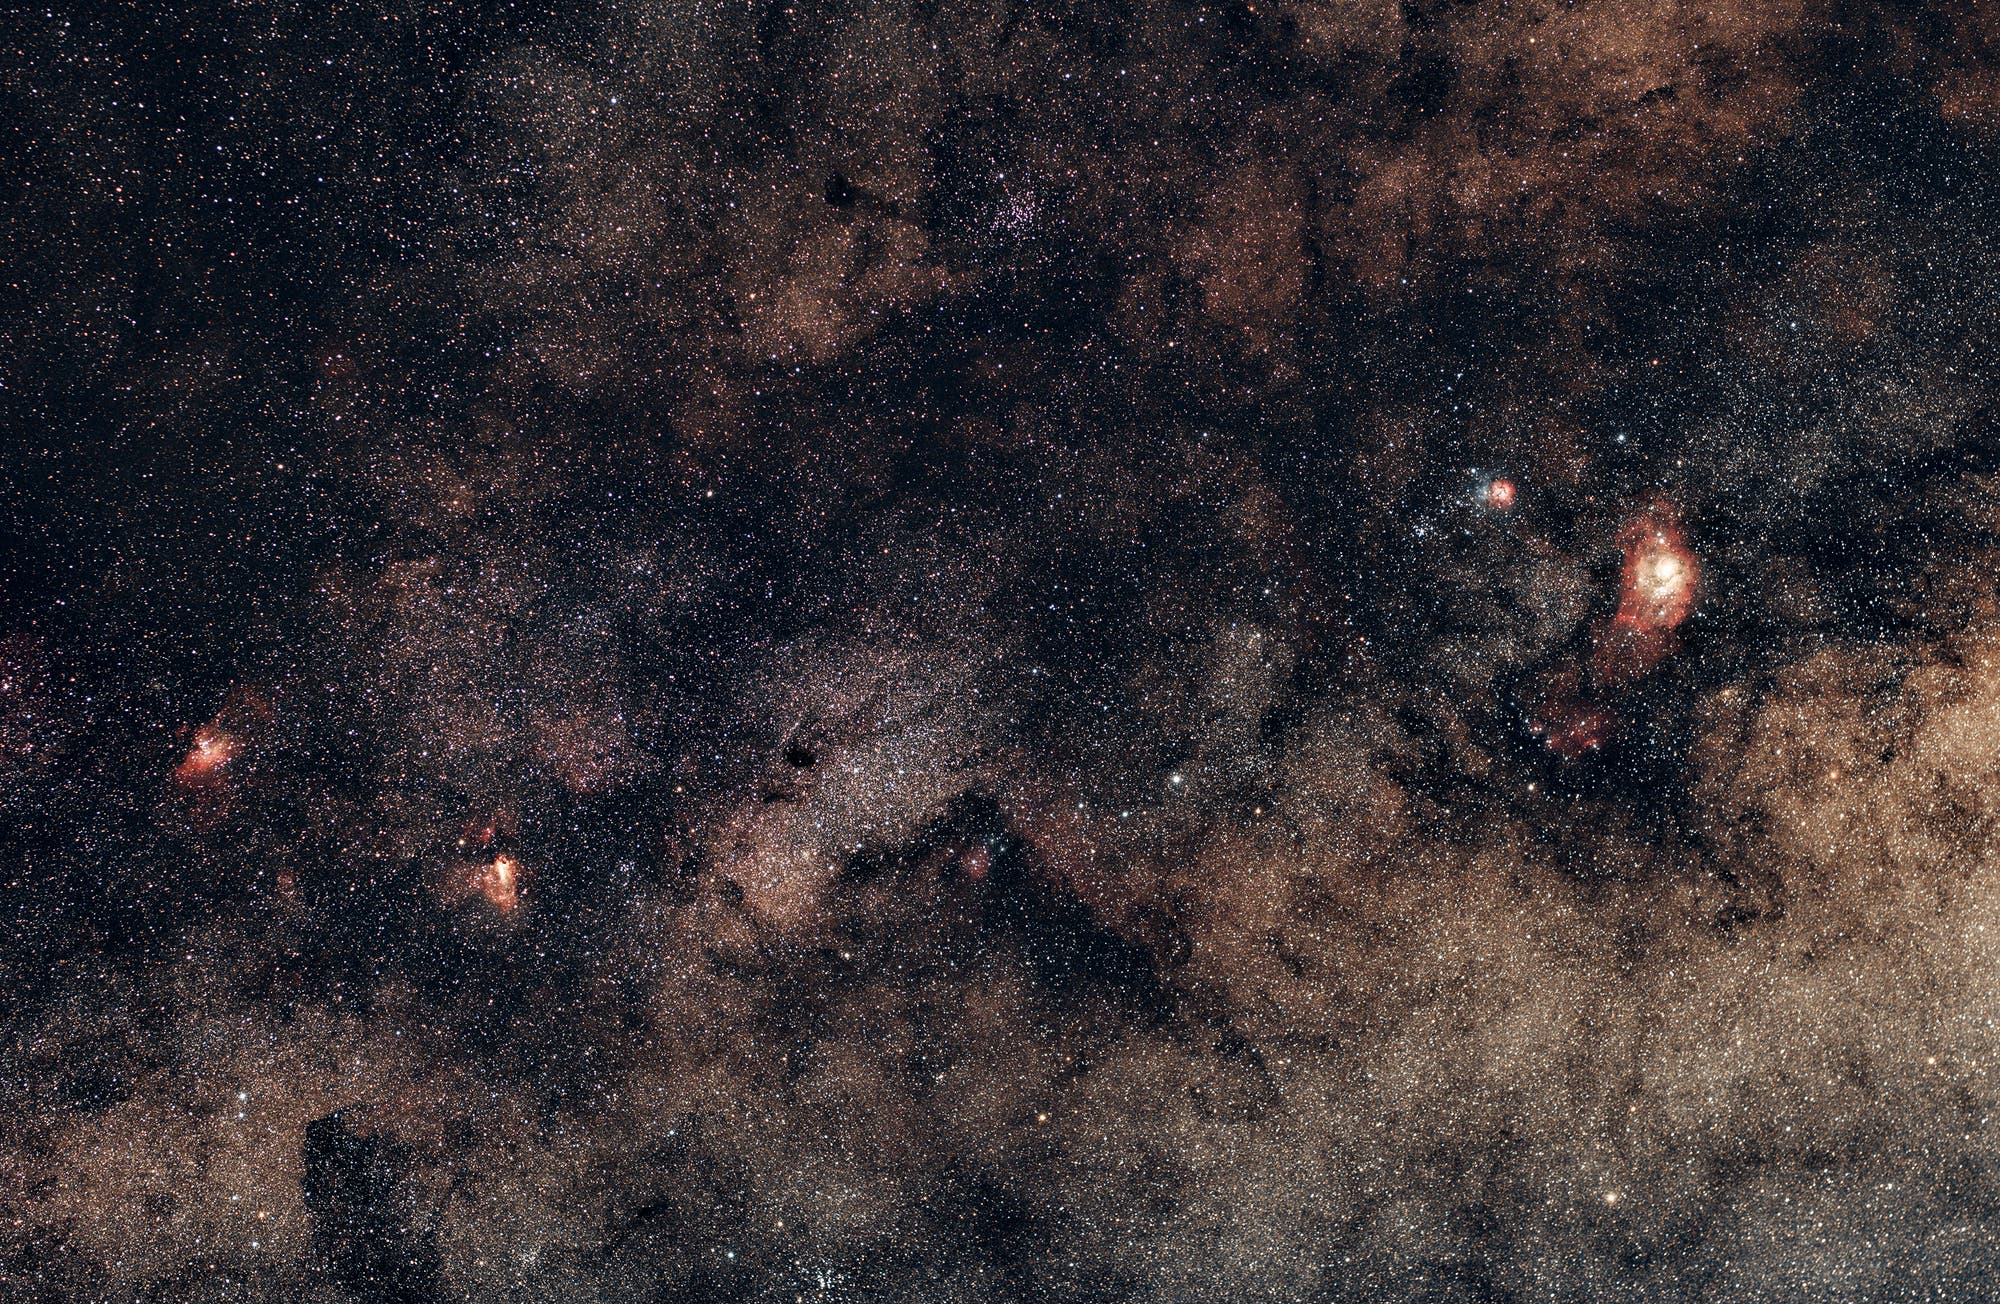 FROM MESSIER 16 TO MESSIER 8